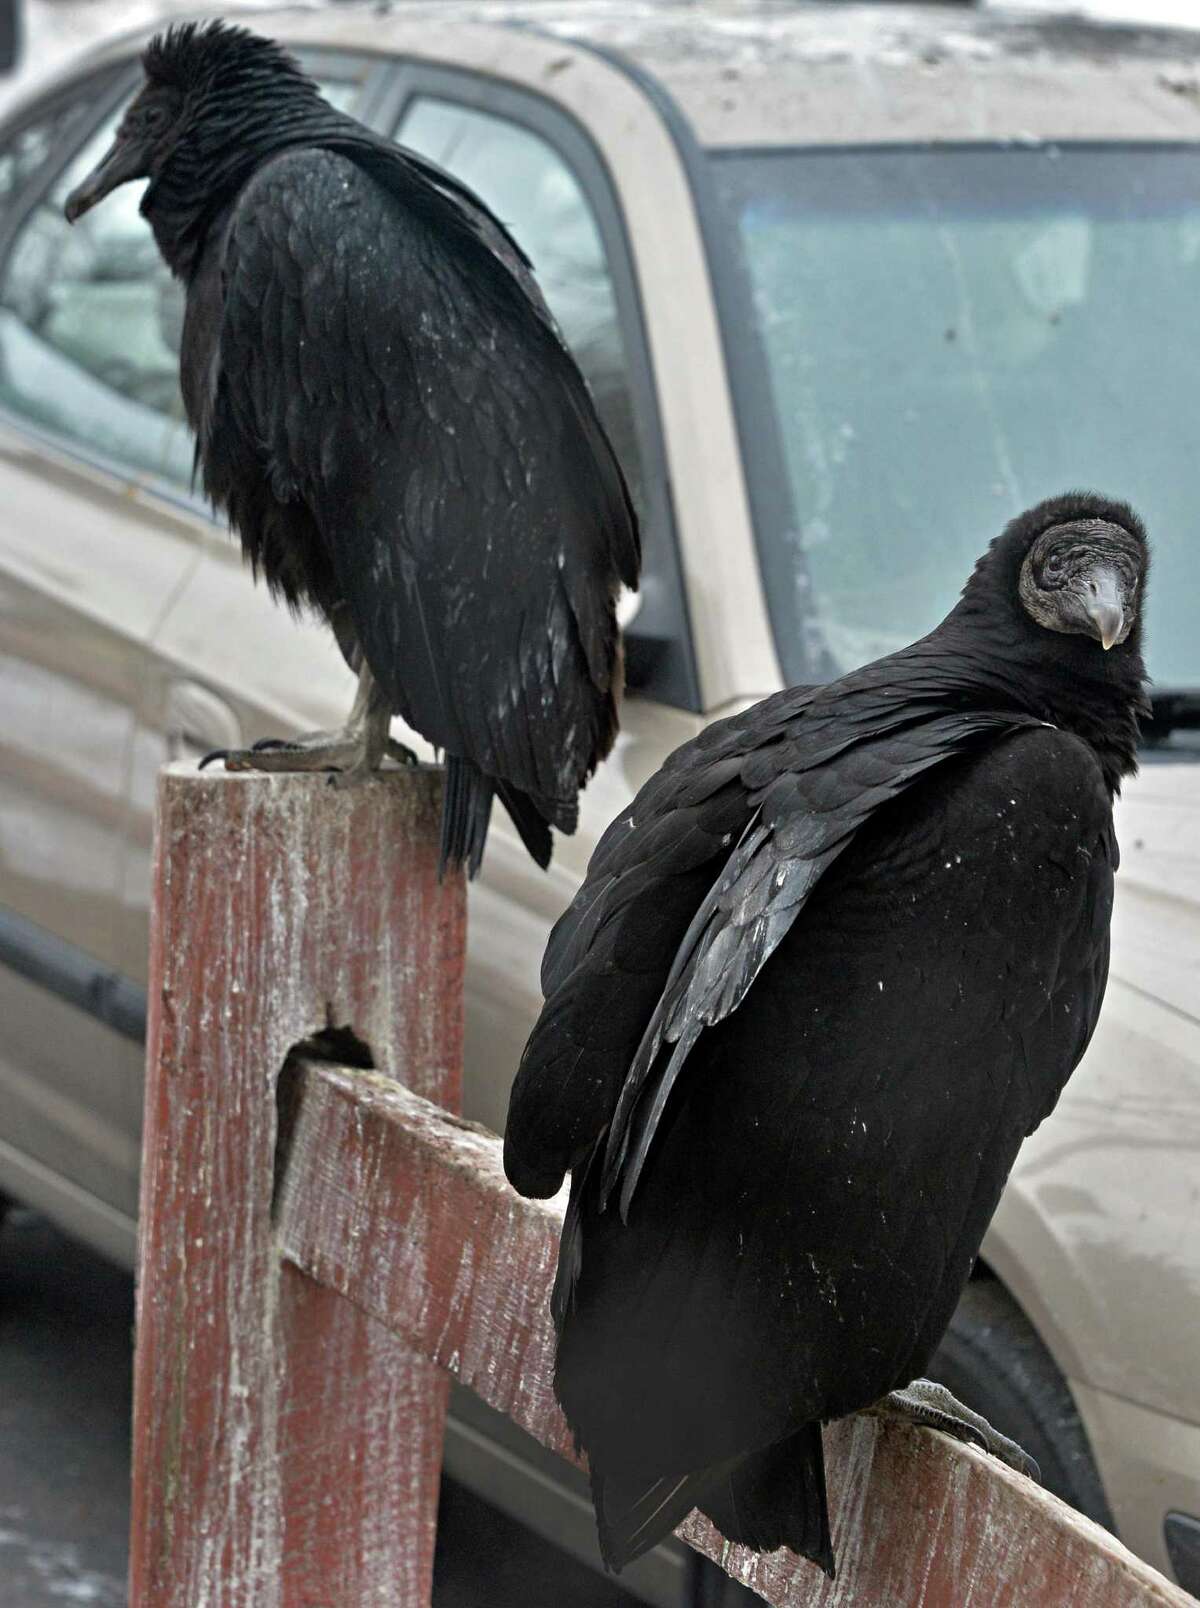 Vultures outside Patricia House's Willey Street home Wednesday March 5, 2014, in Guilderland, NY. (John Carl D'Annibale / Times Union)